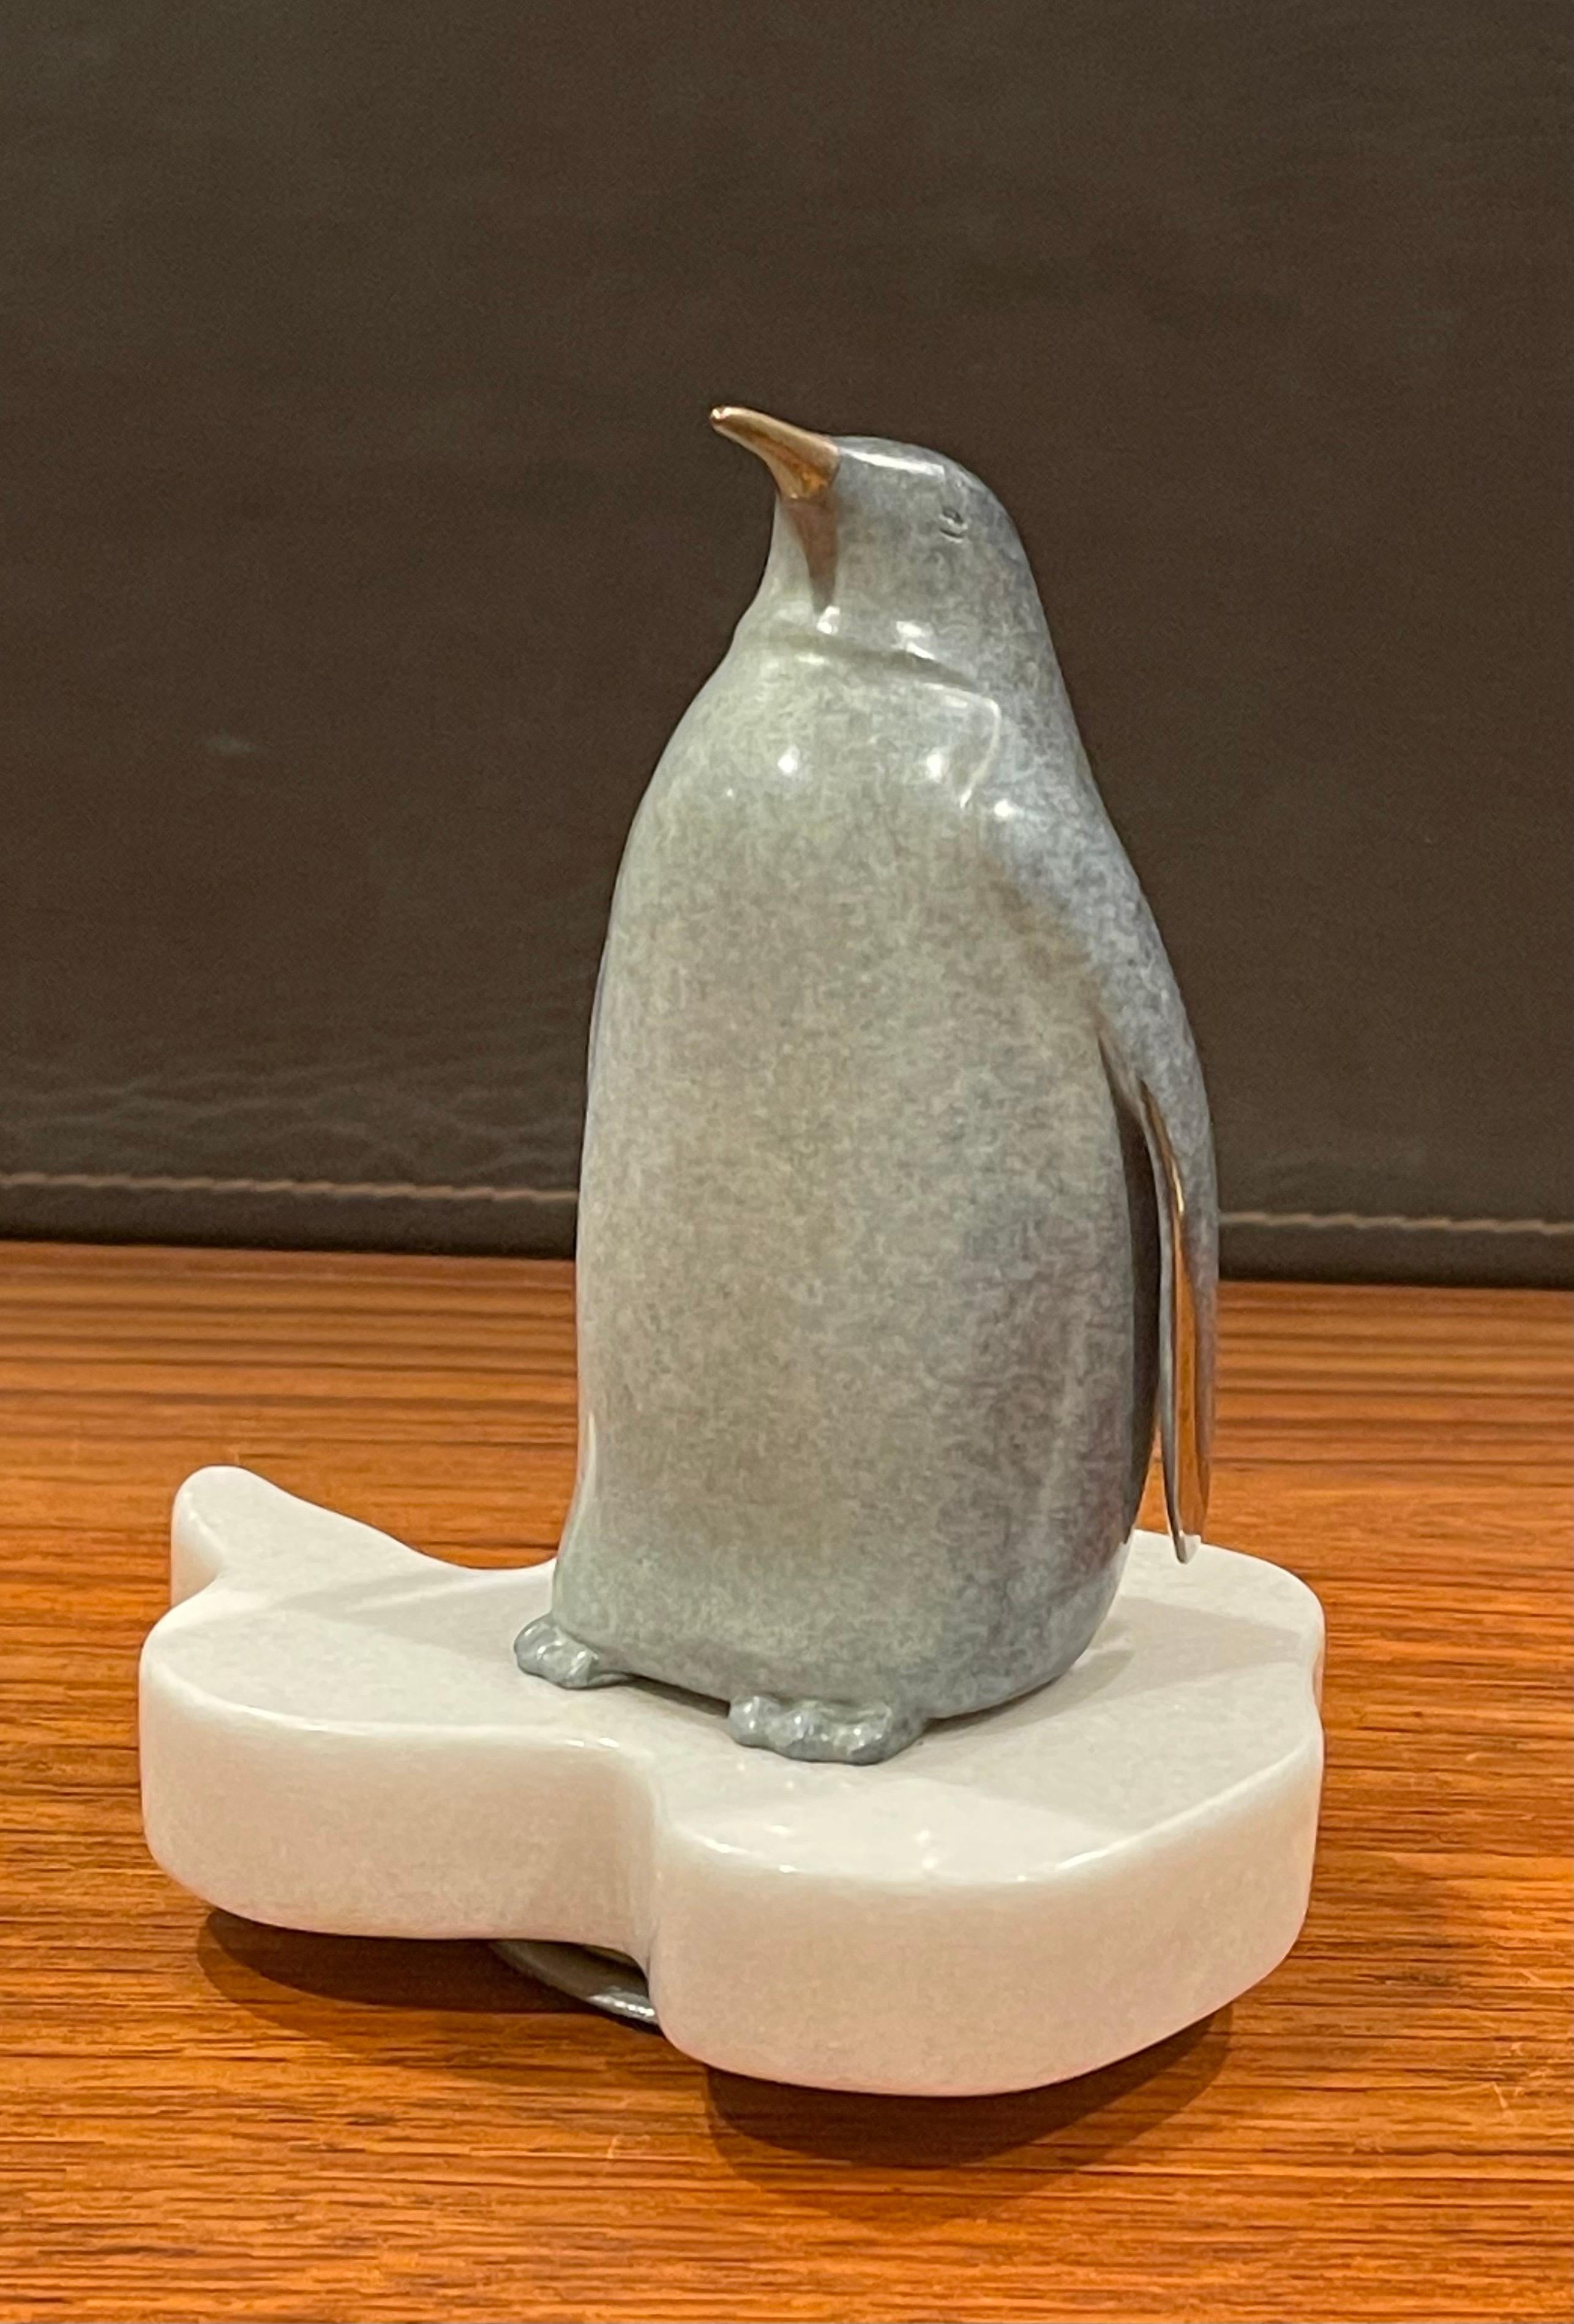 A very cool, unique and whimsical patinated bronze penguin sculpture on a rotating white marble base by noted wildlife sculptor Scott Hanson, circa 1999. The piece is in excellent condition and measures 6